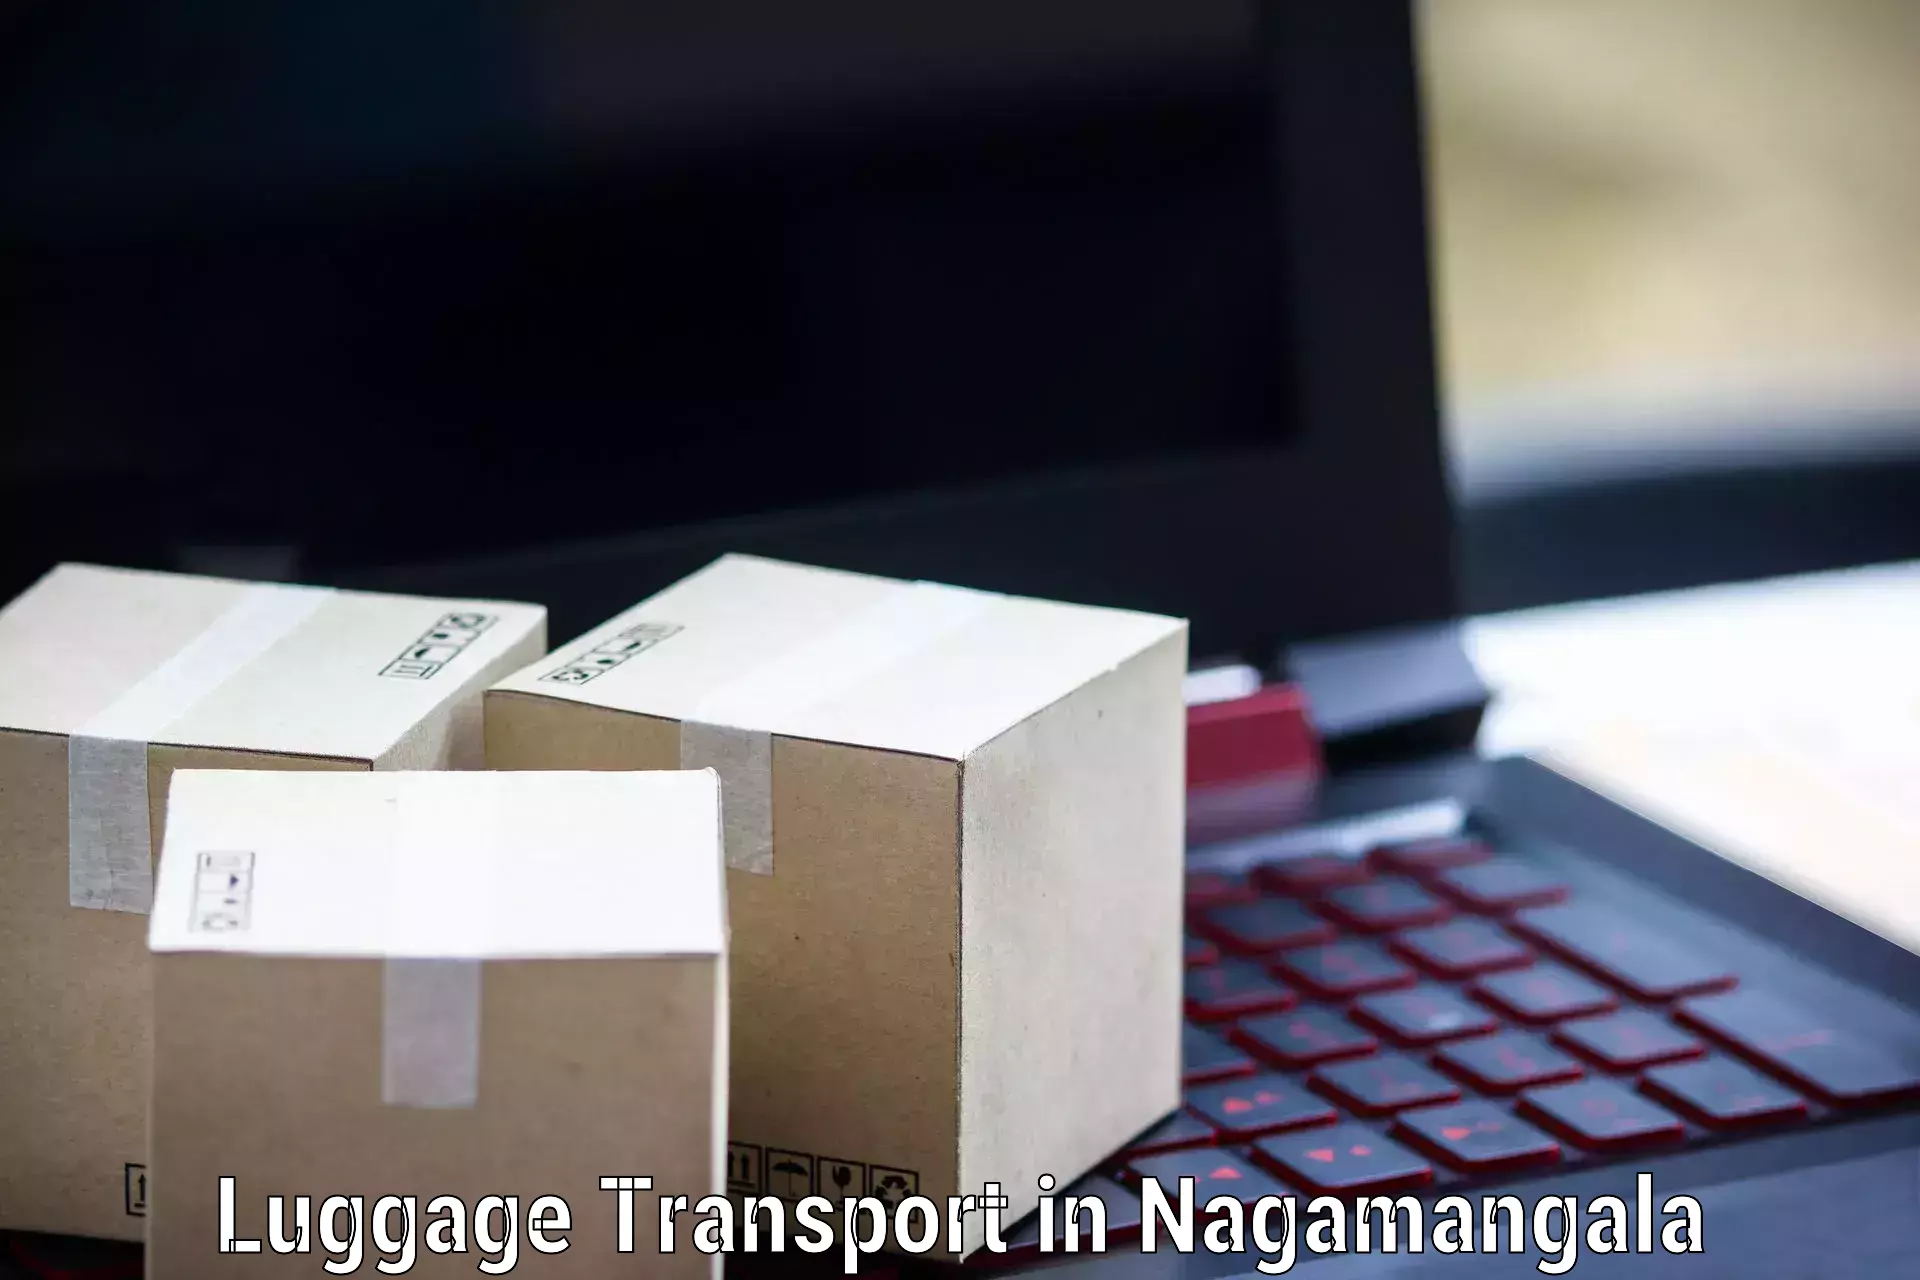 Luggage delivery operations in Nagamangala